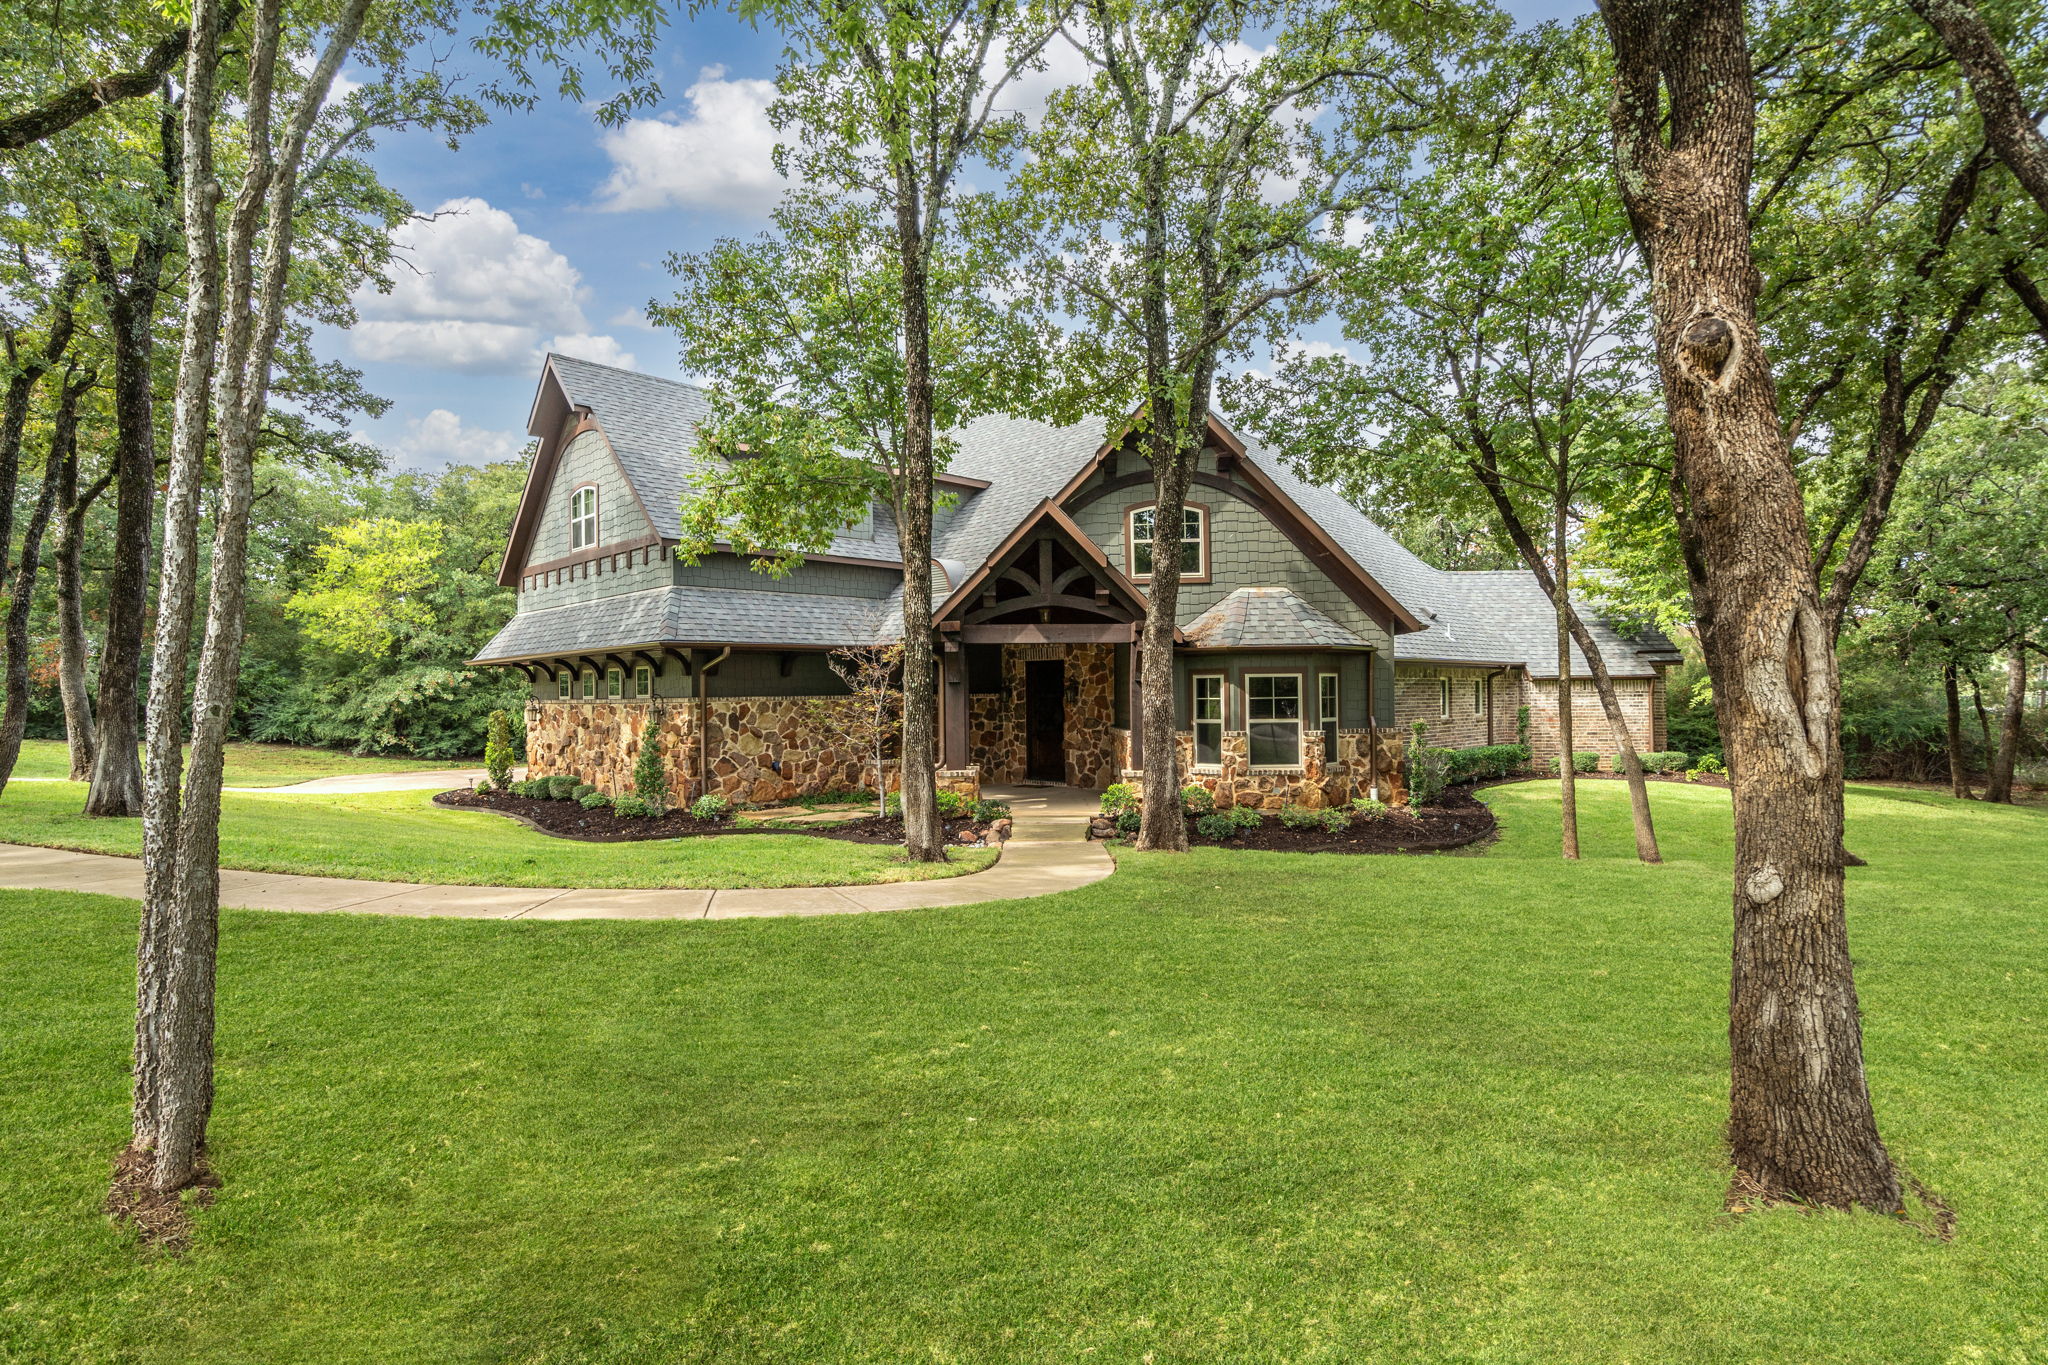 Custom built home on almost 2 acres of private wooded land with mature trees.